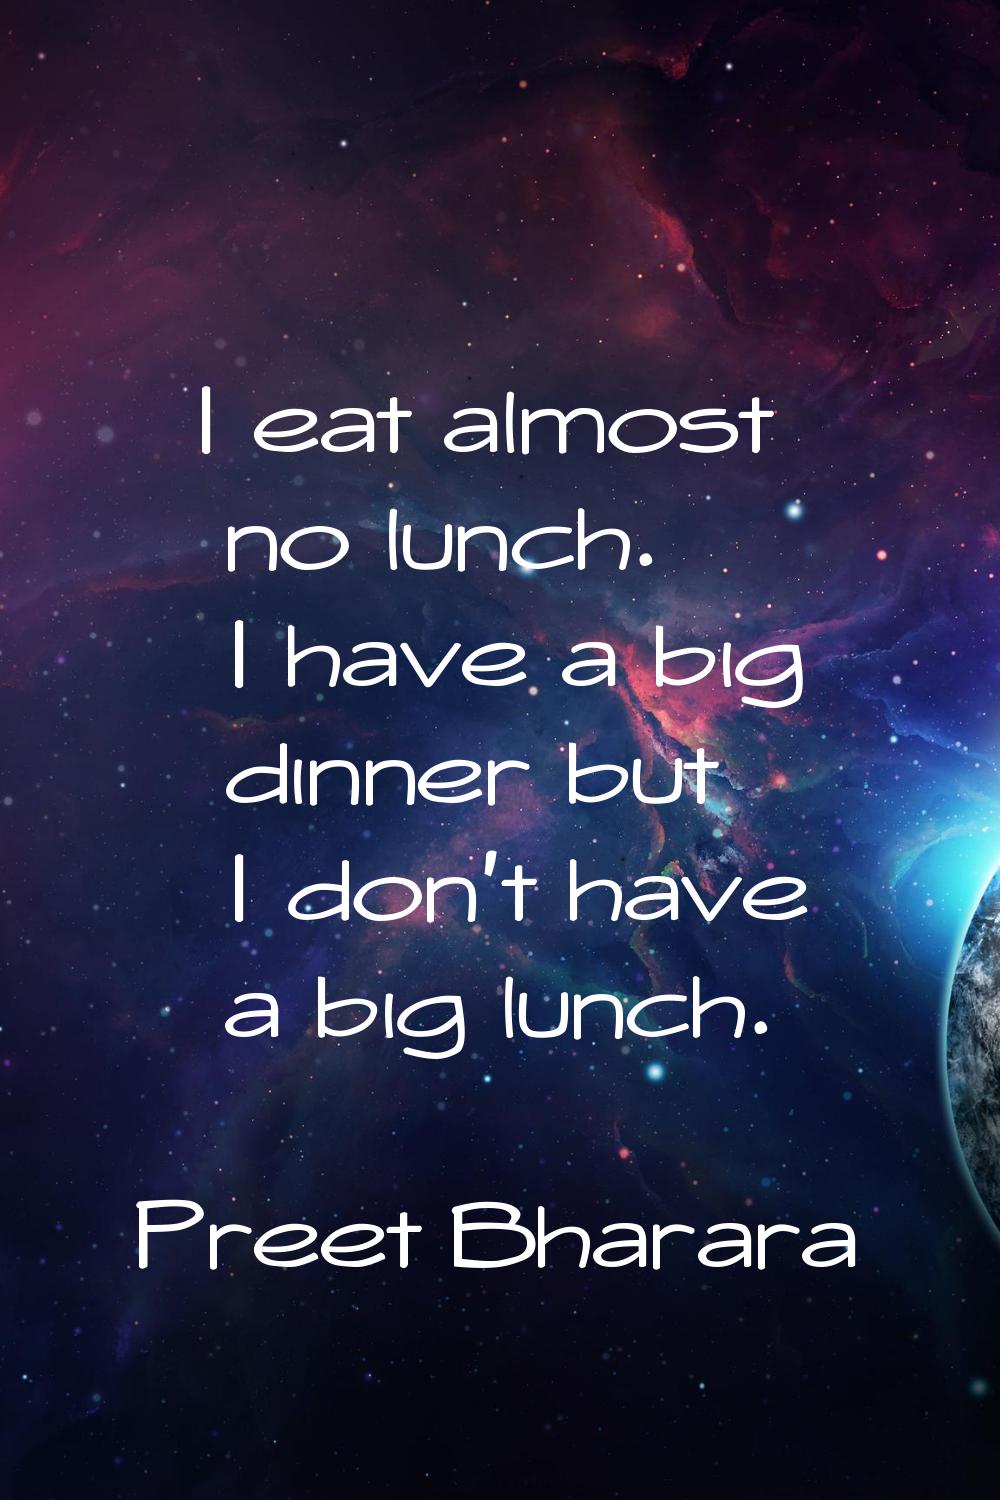 I eat almost no lunch. I have a big dinner but I don't have a big lunch.